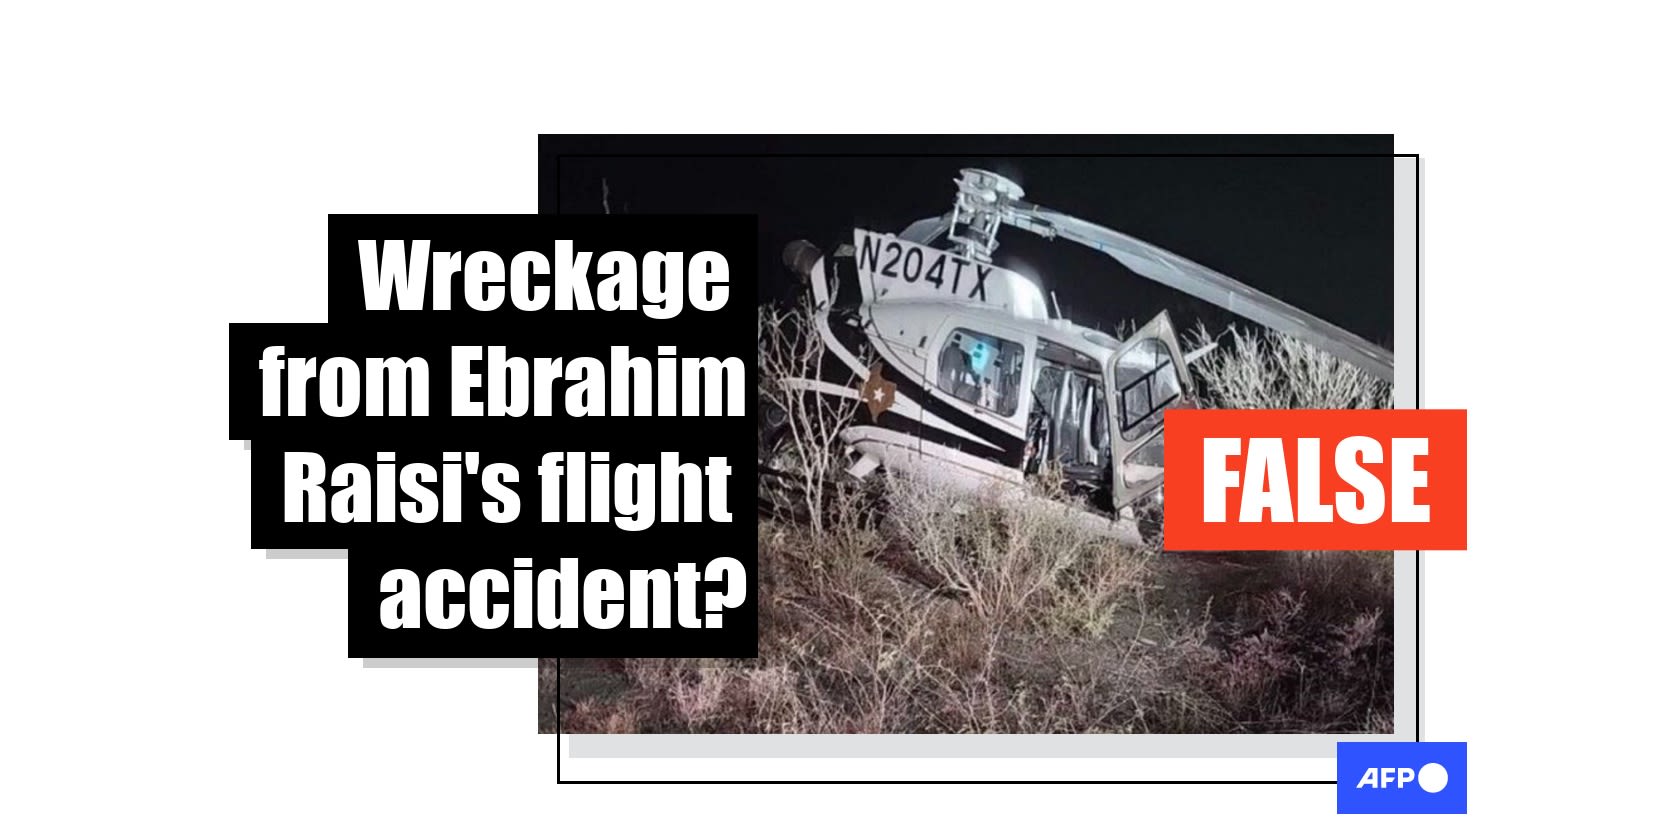 Photo shows crashed Texas helicopter, not Iranian president's aircraft